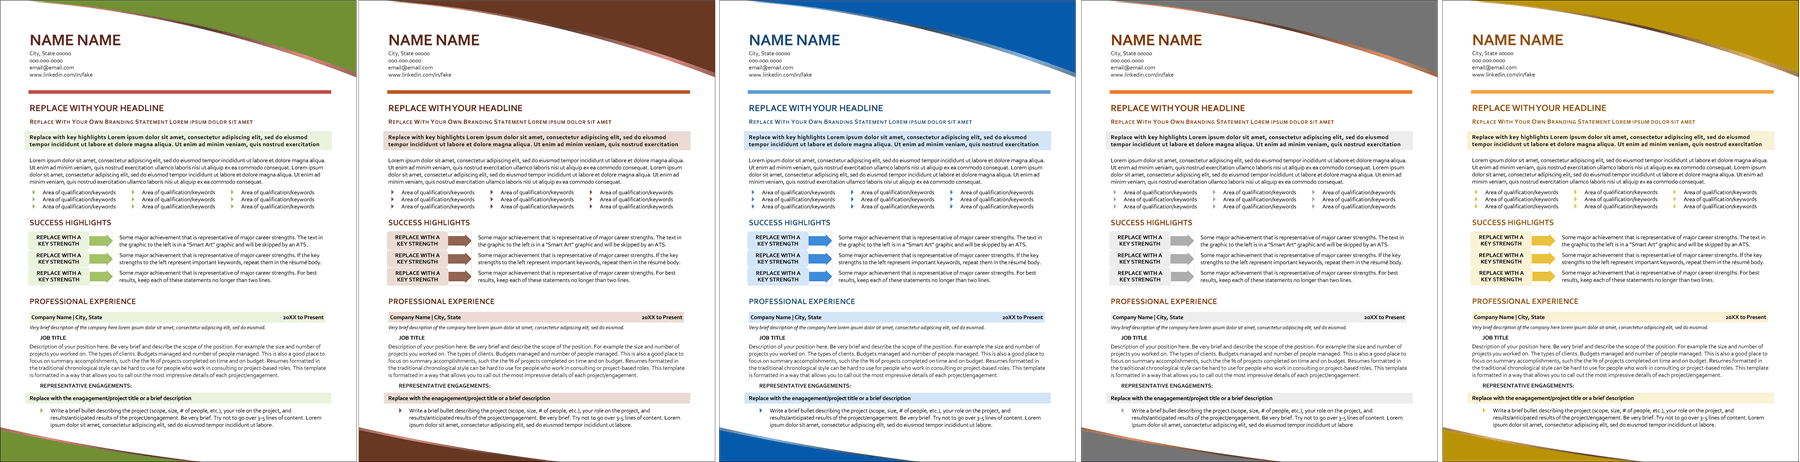 resume for project management colors